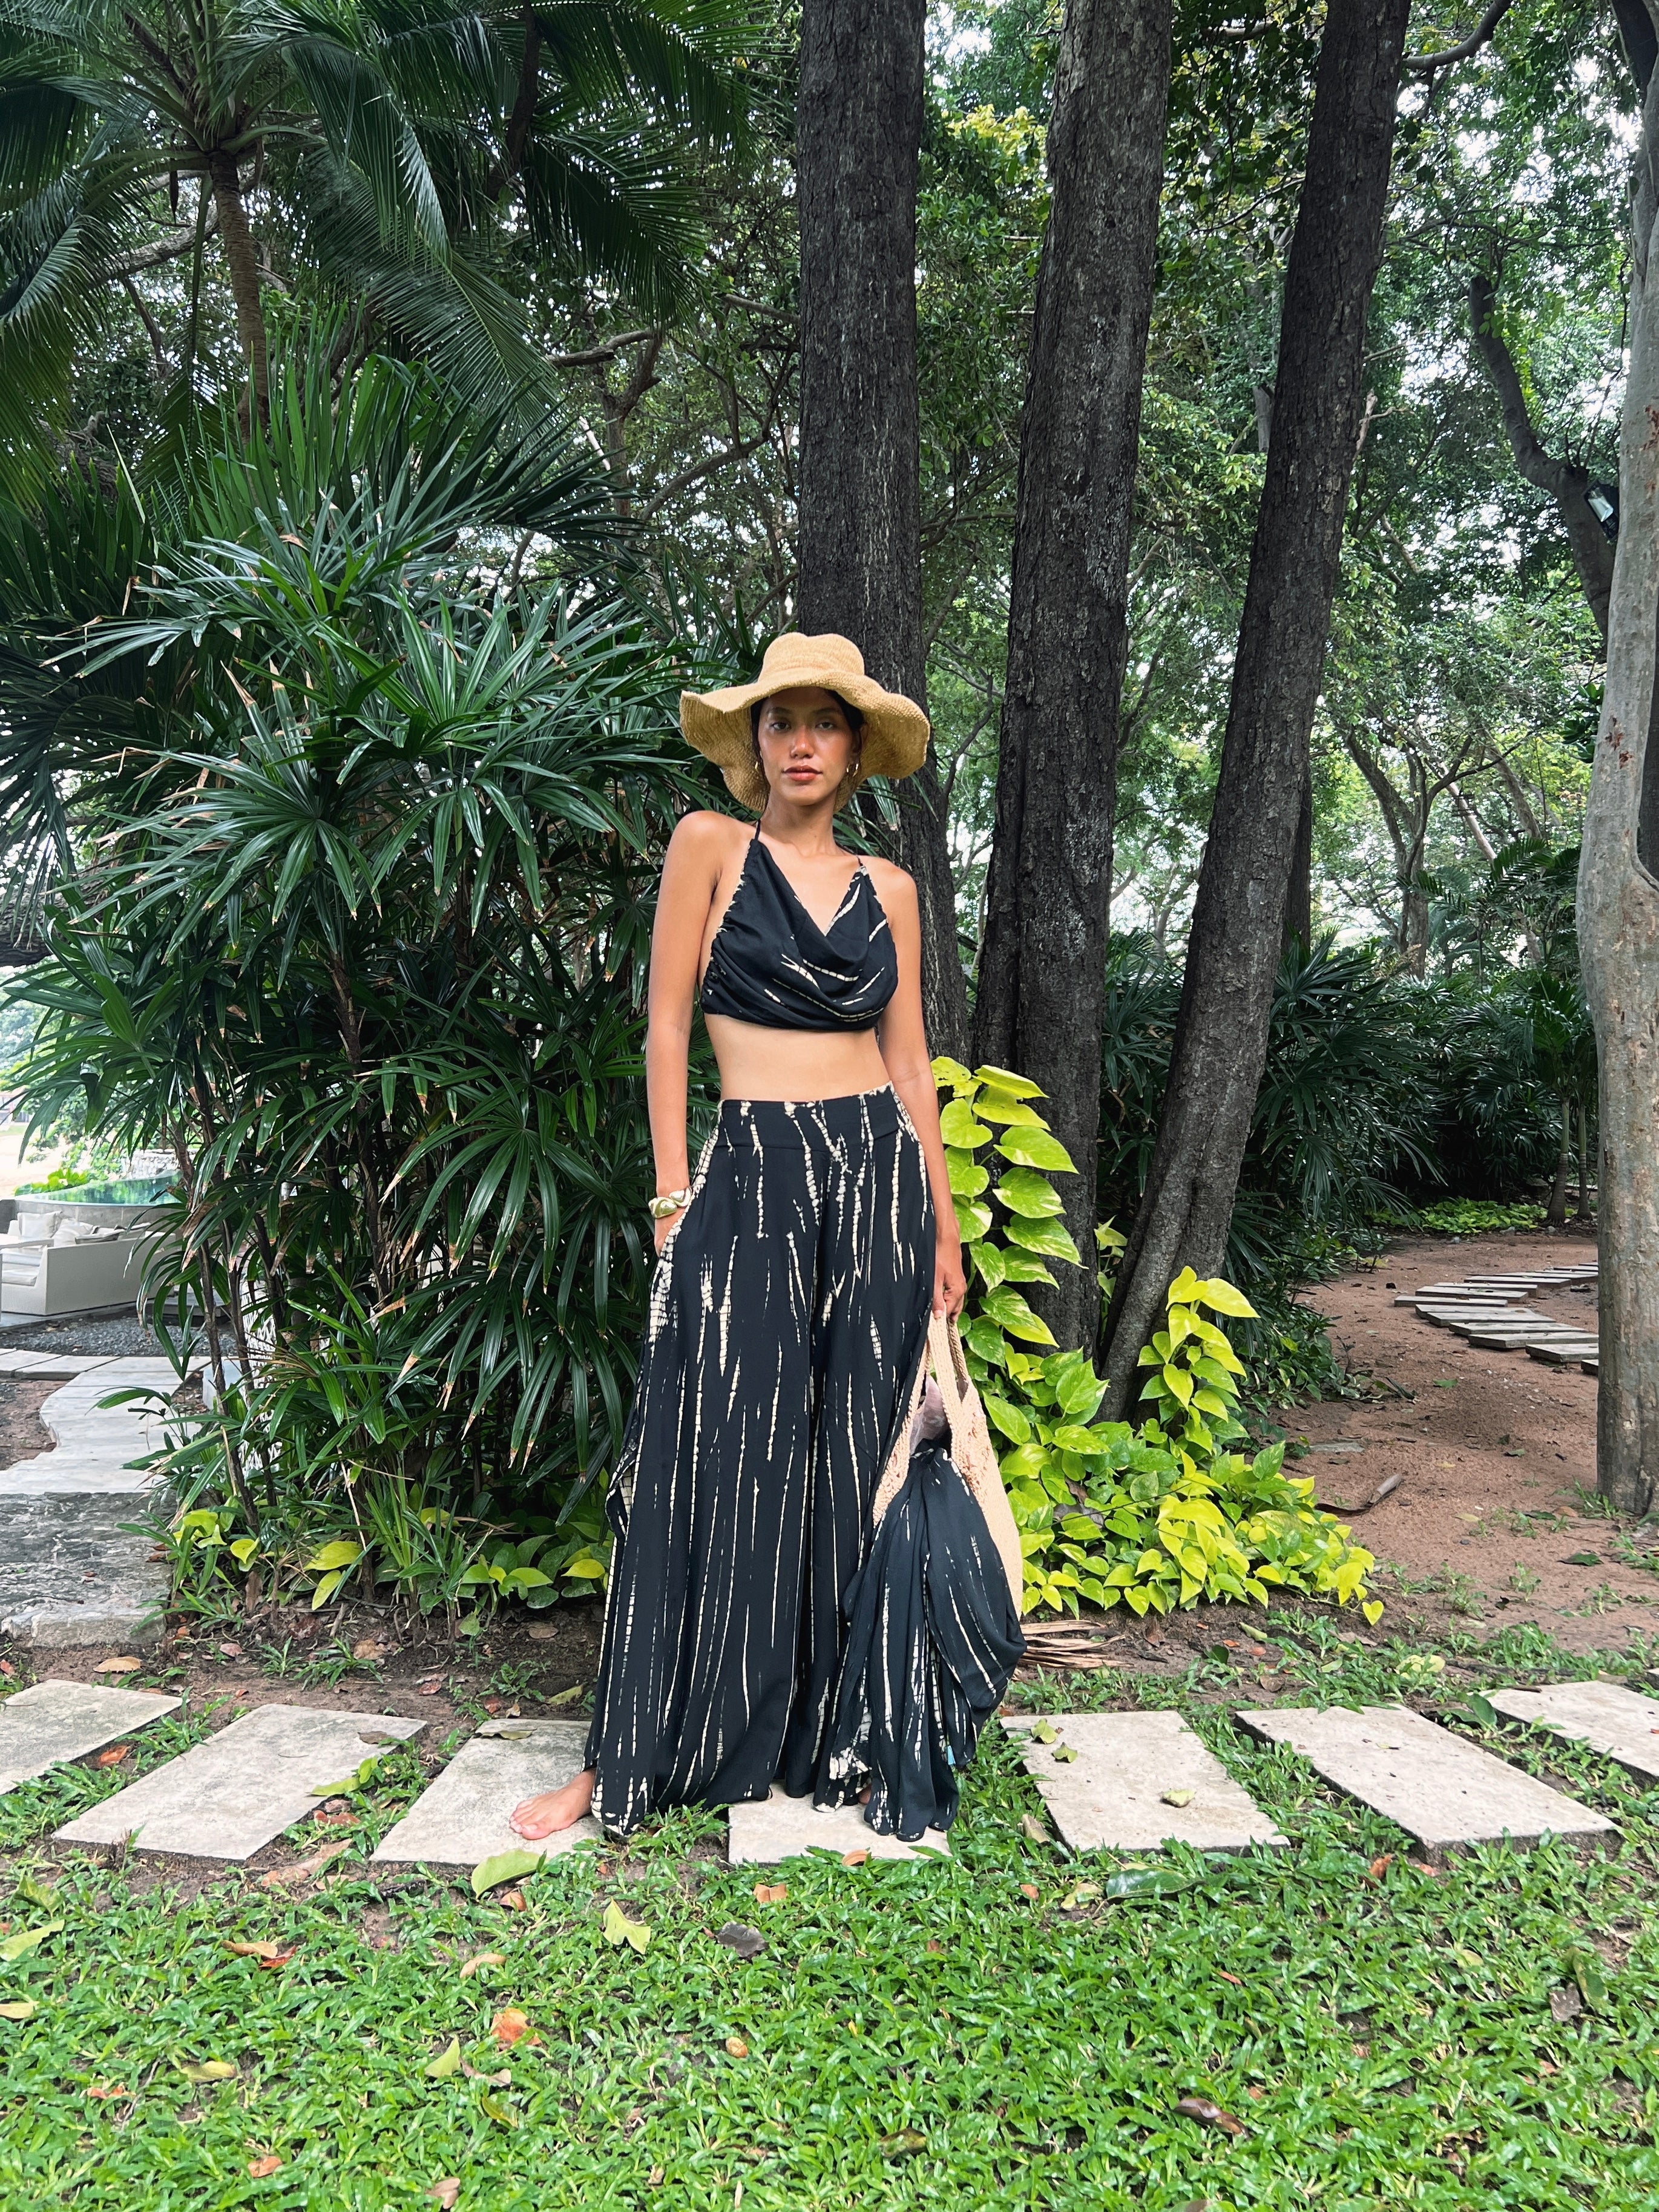 Shop our new handcrafted Maya Crop Tops, where playful style, bohemian vibes, and comfort come together effortlessly.  Complete your look with the Maya Kimono robe and Maya Boho Wide Leg Pants for head-to-toe vibrancy. Plus, the adjustable sleeve cinched crop top keeps you in fashion all year round. It's the perfect choice for staying stylish, no matter the season! Perfect for summer outfits, beach aesthetic, concert festival outfits.. or even yoga day